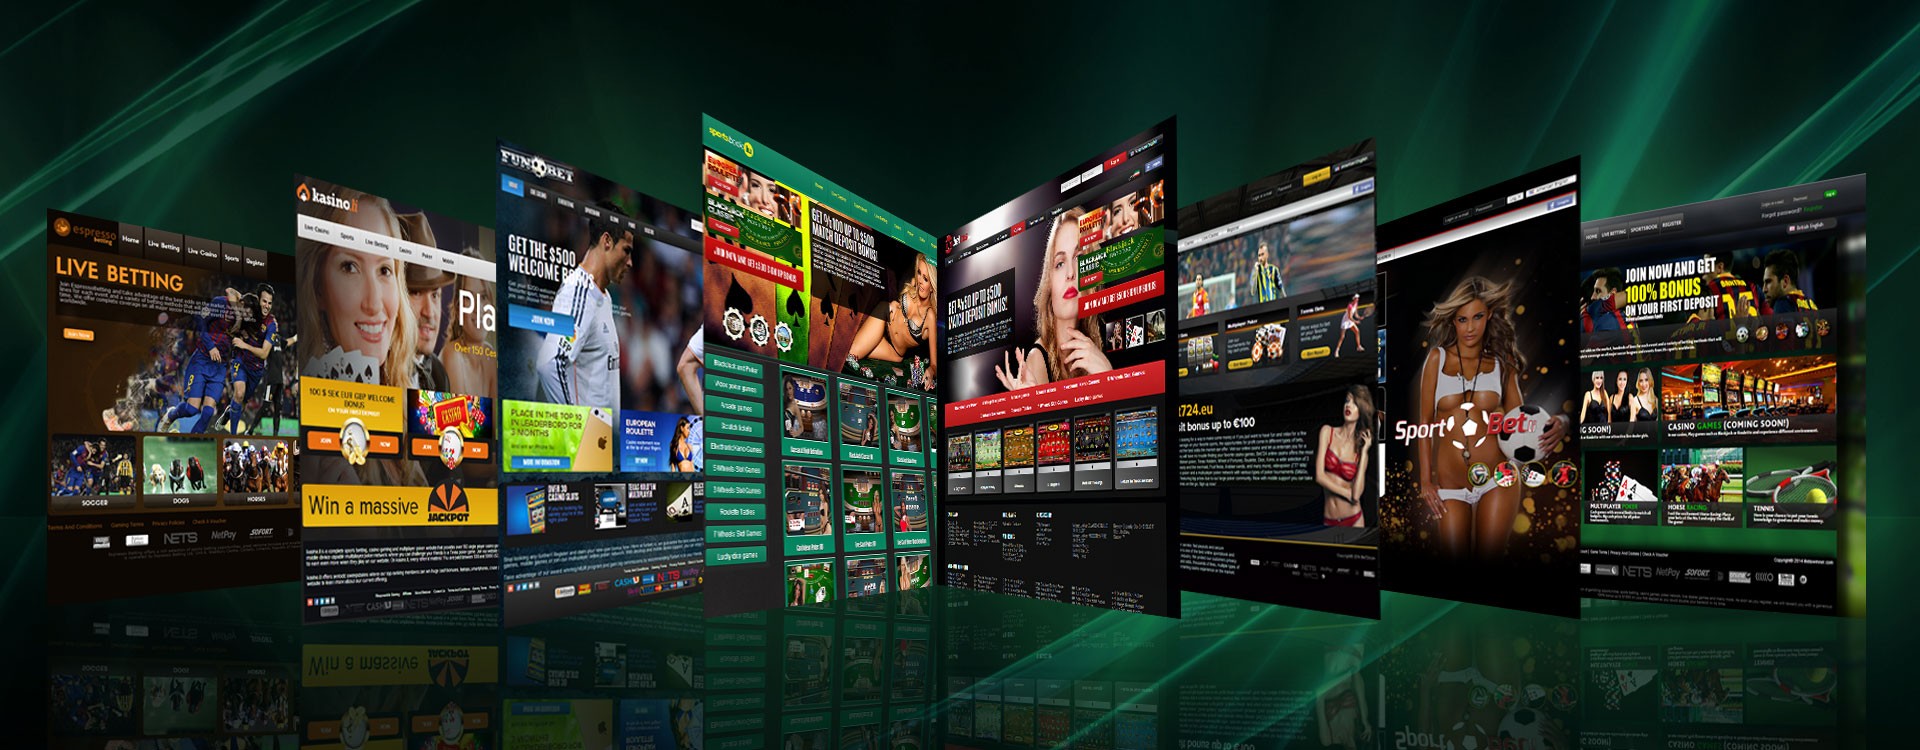 What Makes a Popular Online Sports Betting Site?